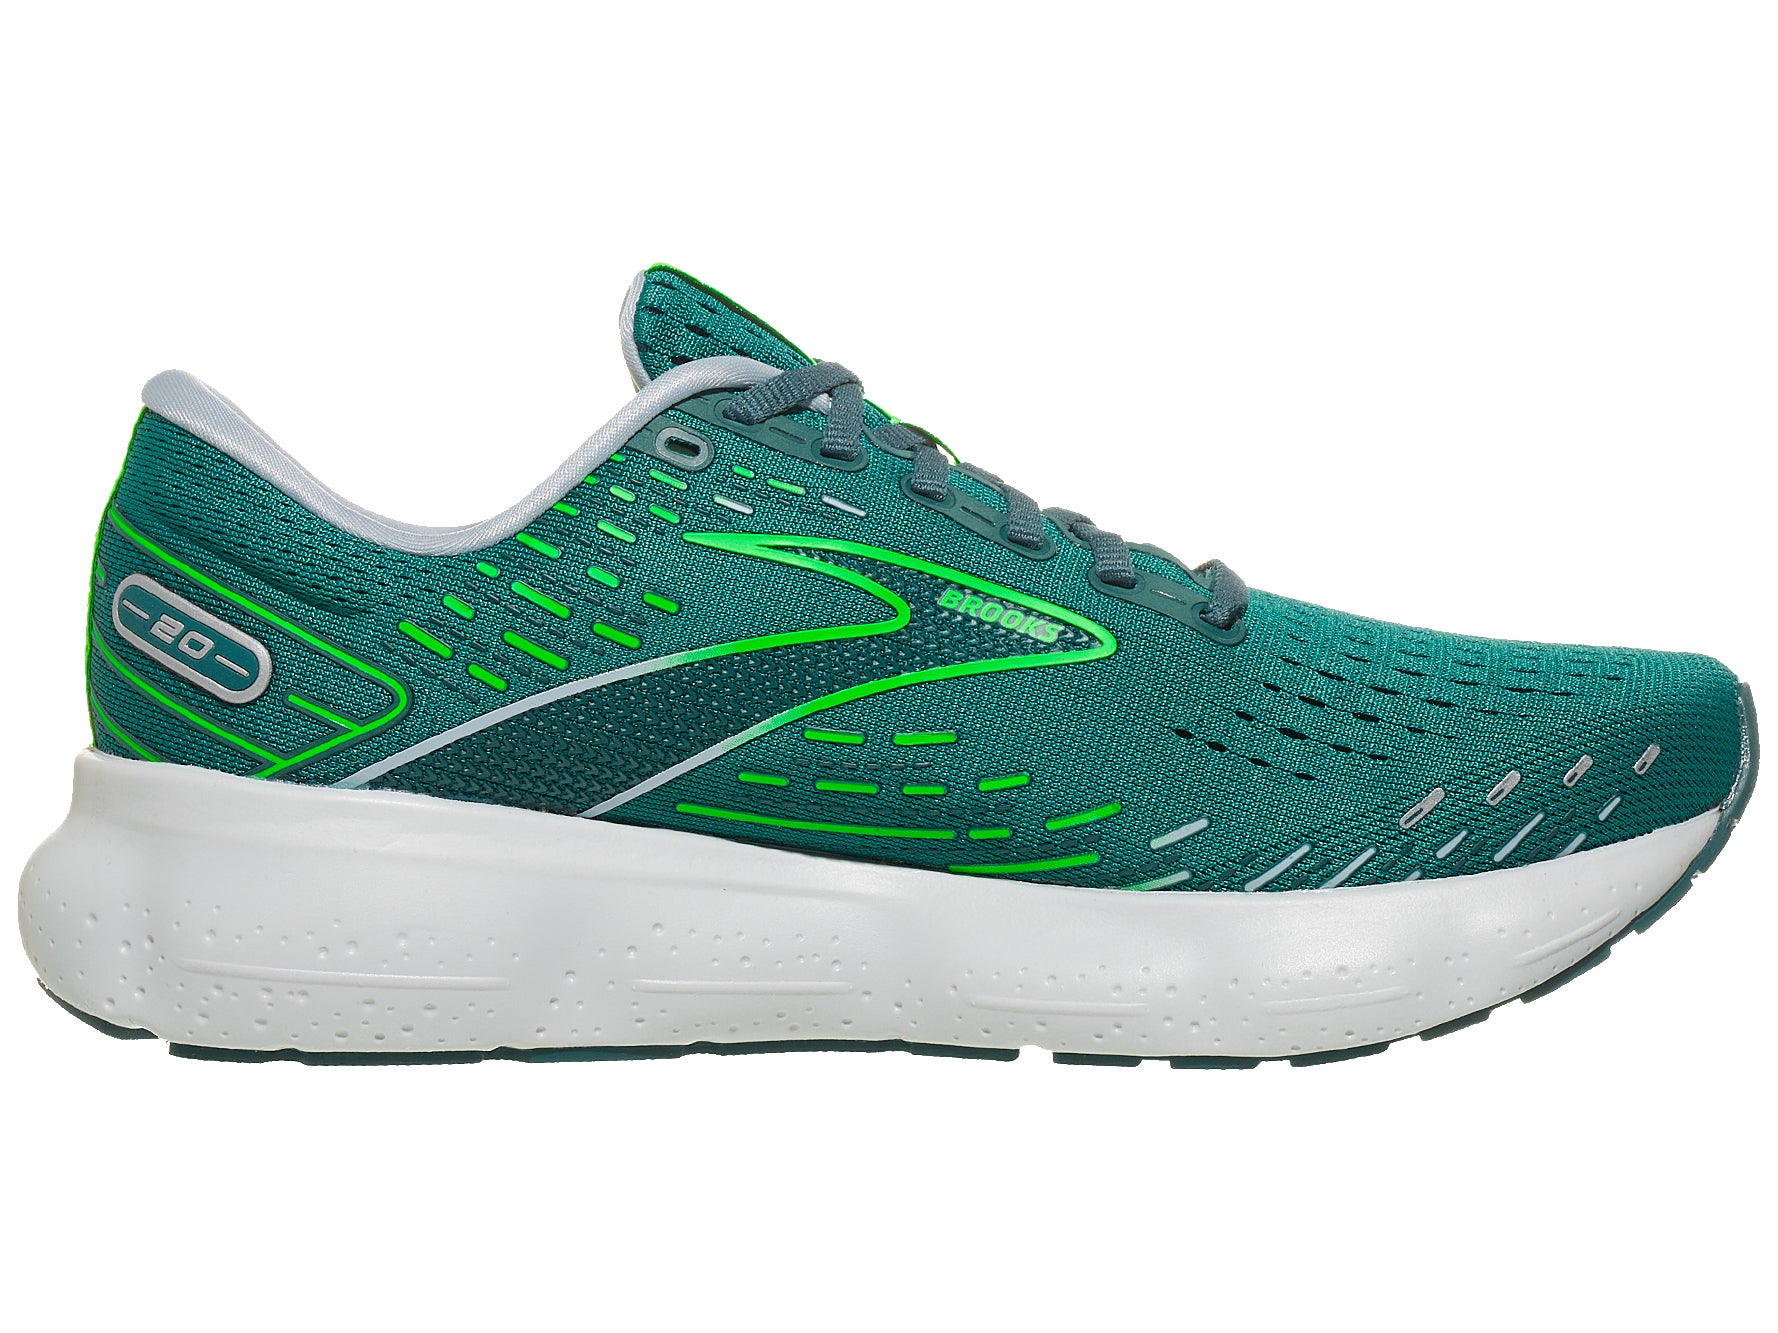 Brooks Glycerin 20 and Glycerin GTS 20 Shoe Review | Running Warehouse